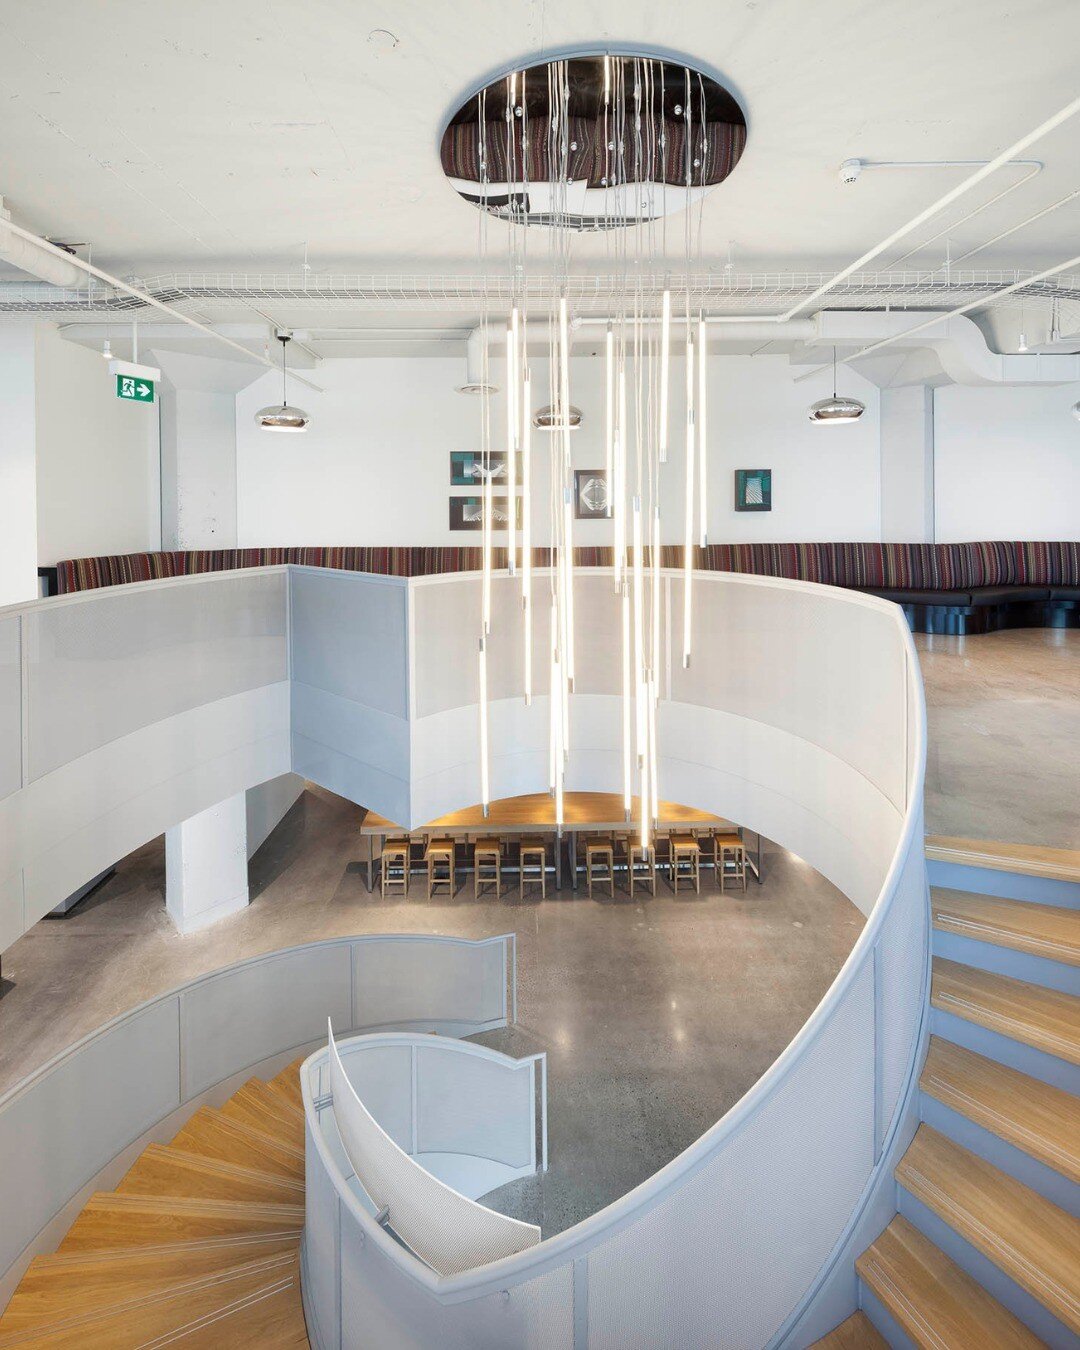 This curvilinear stair and cascading cluster of cylindrical LED pendants were the lobby feature of global marketing agency, McCann, linking the office&rsquo;s two main levels.
_
📷 Photography: Tom Arban&nbsp;@tomarbanphotography
. 
. 
. 
#interiorde